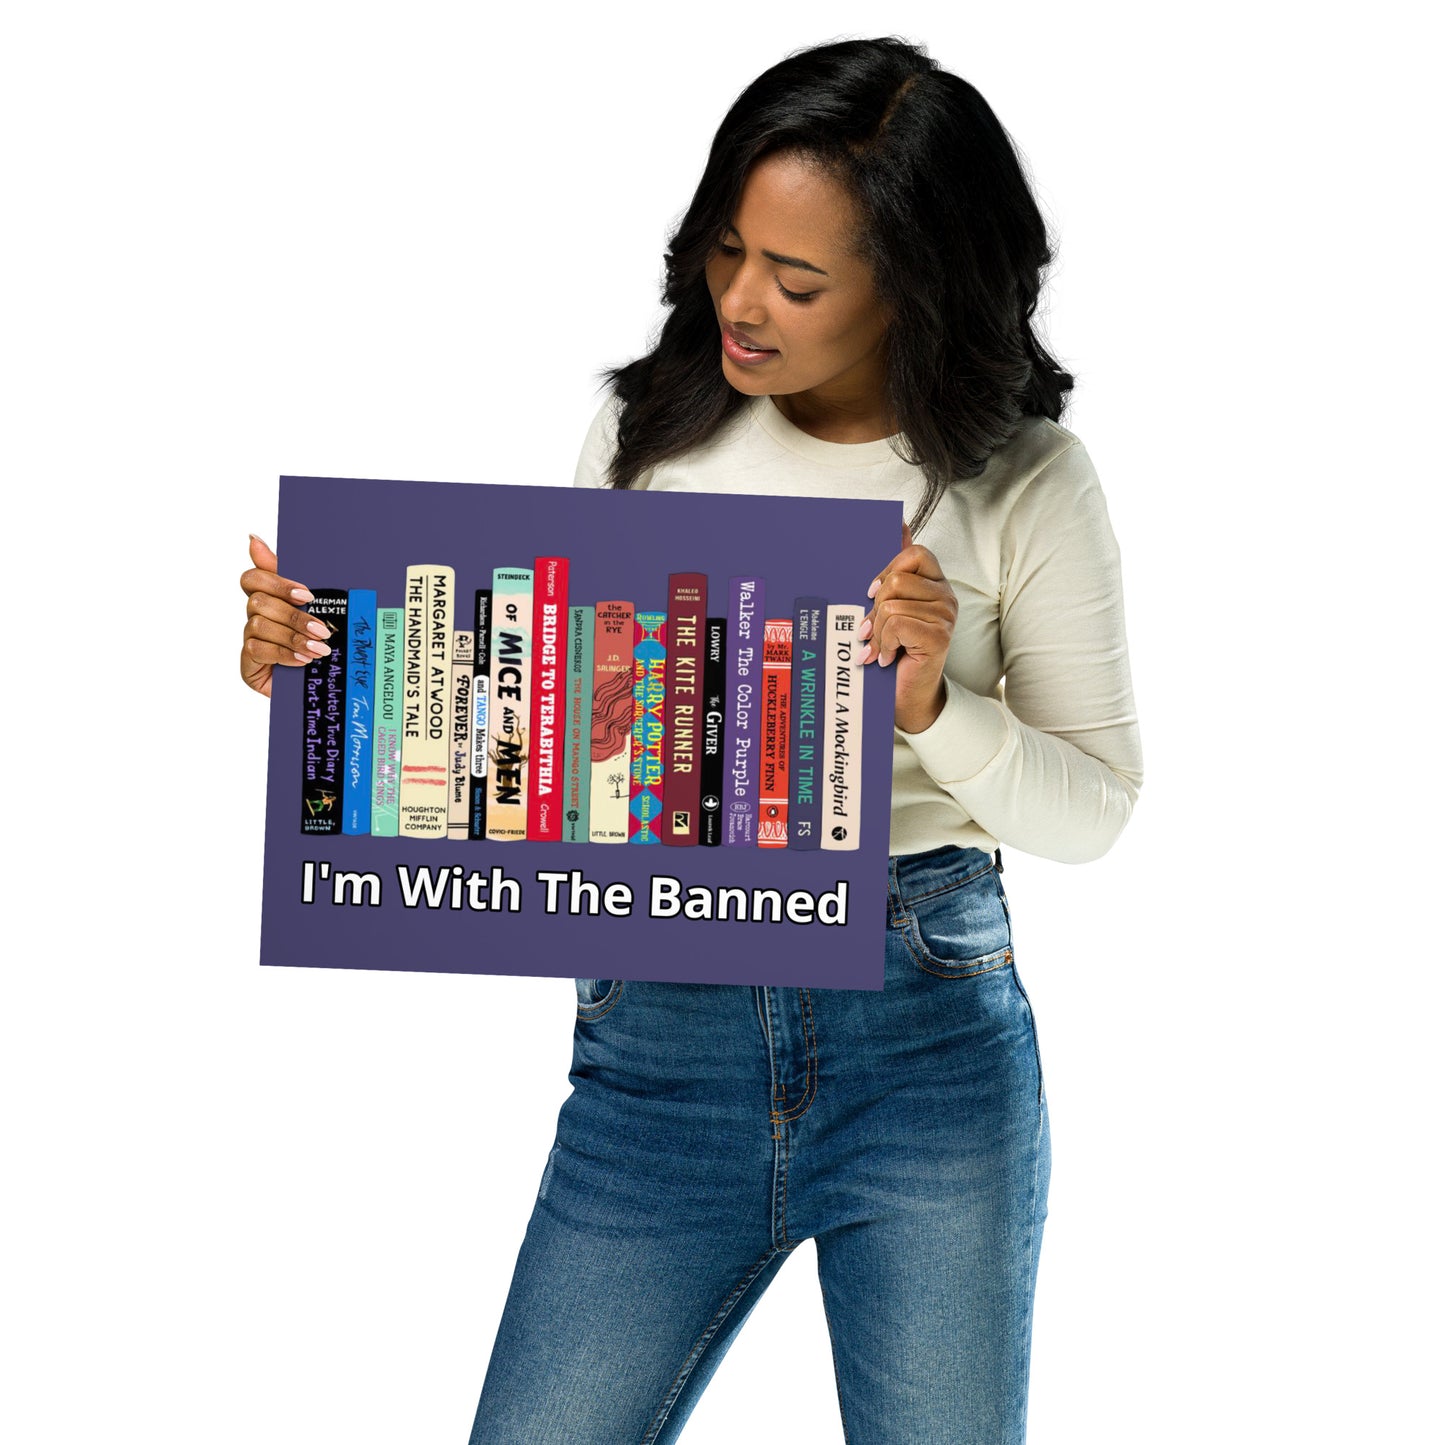 I'm With The Banned - Poster